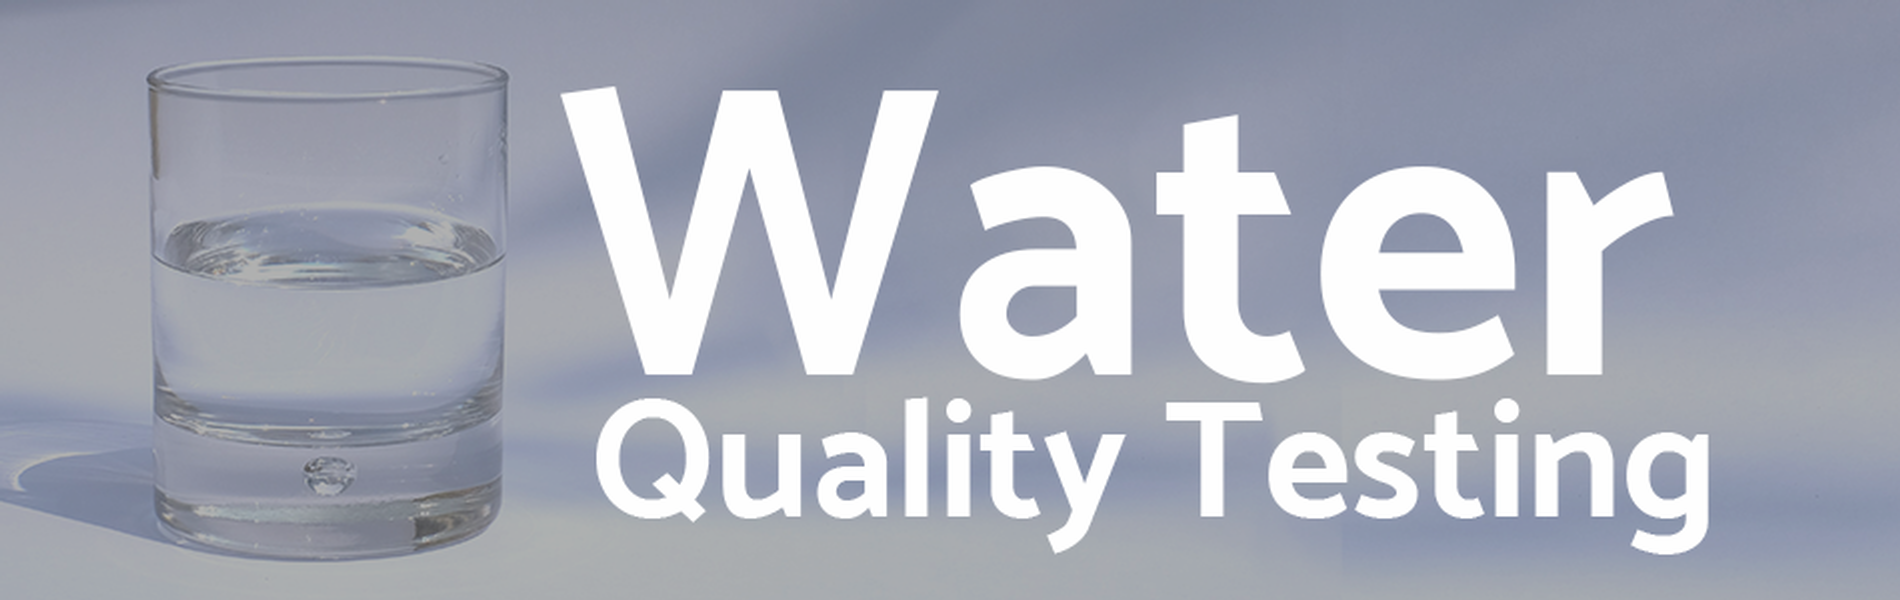 Water Quality Testing